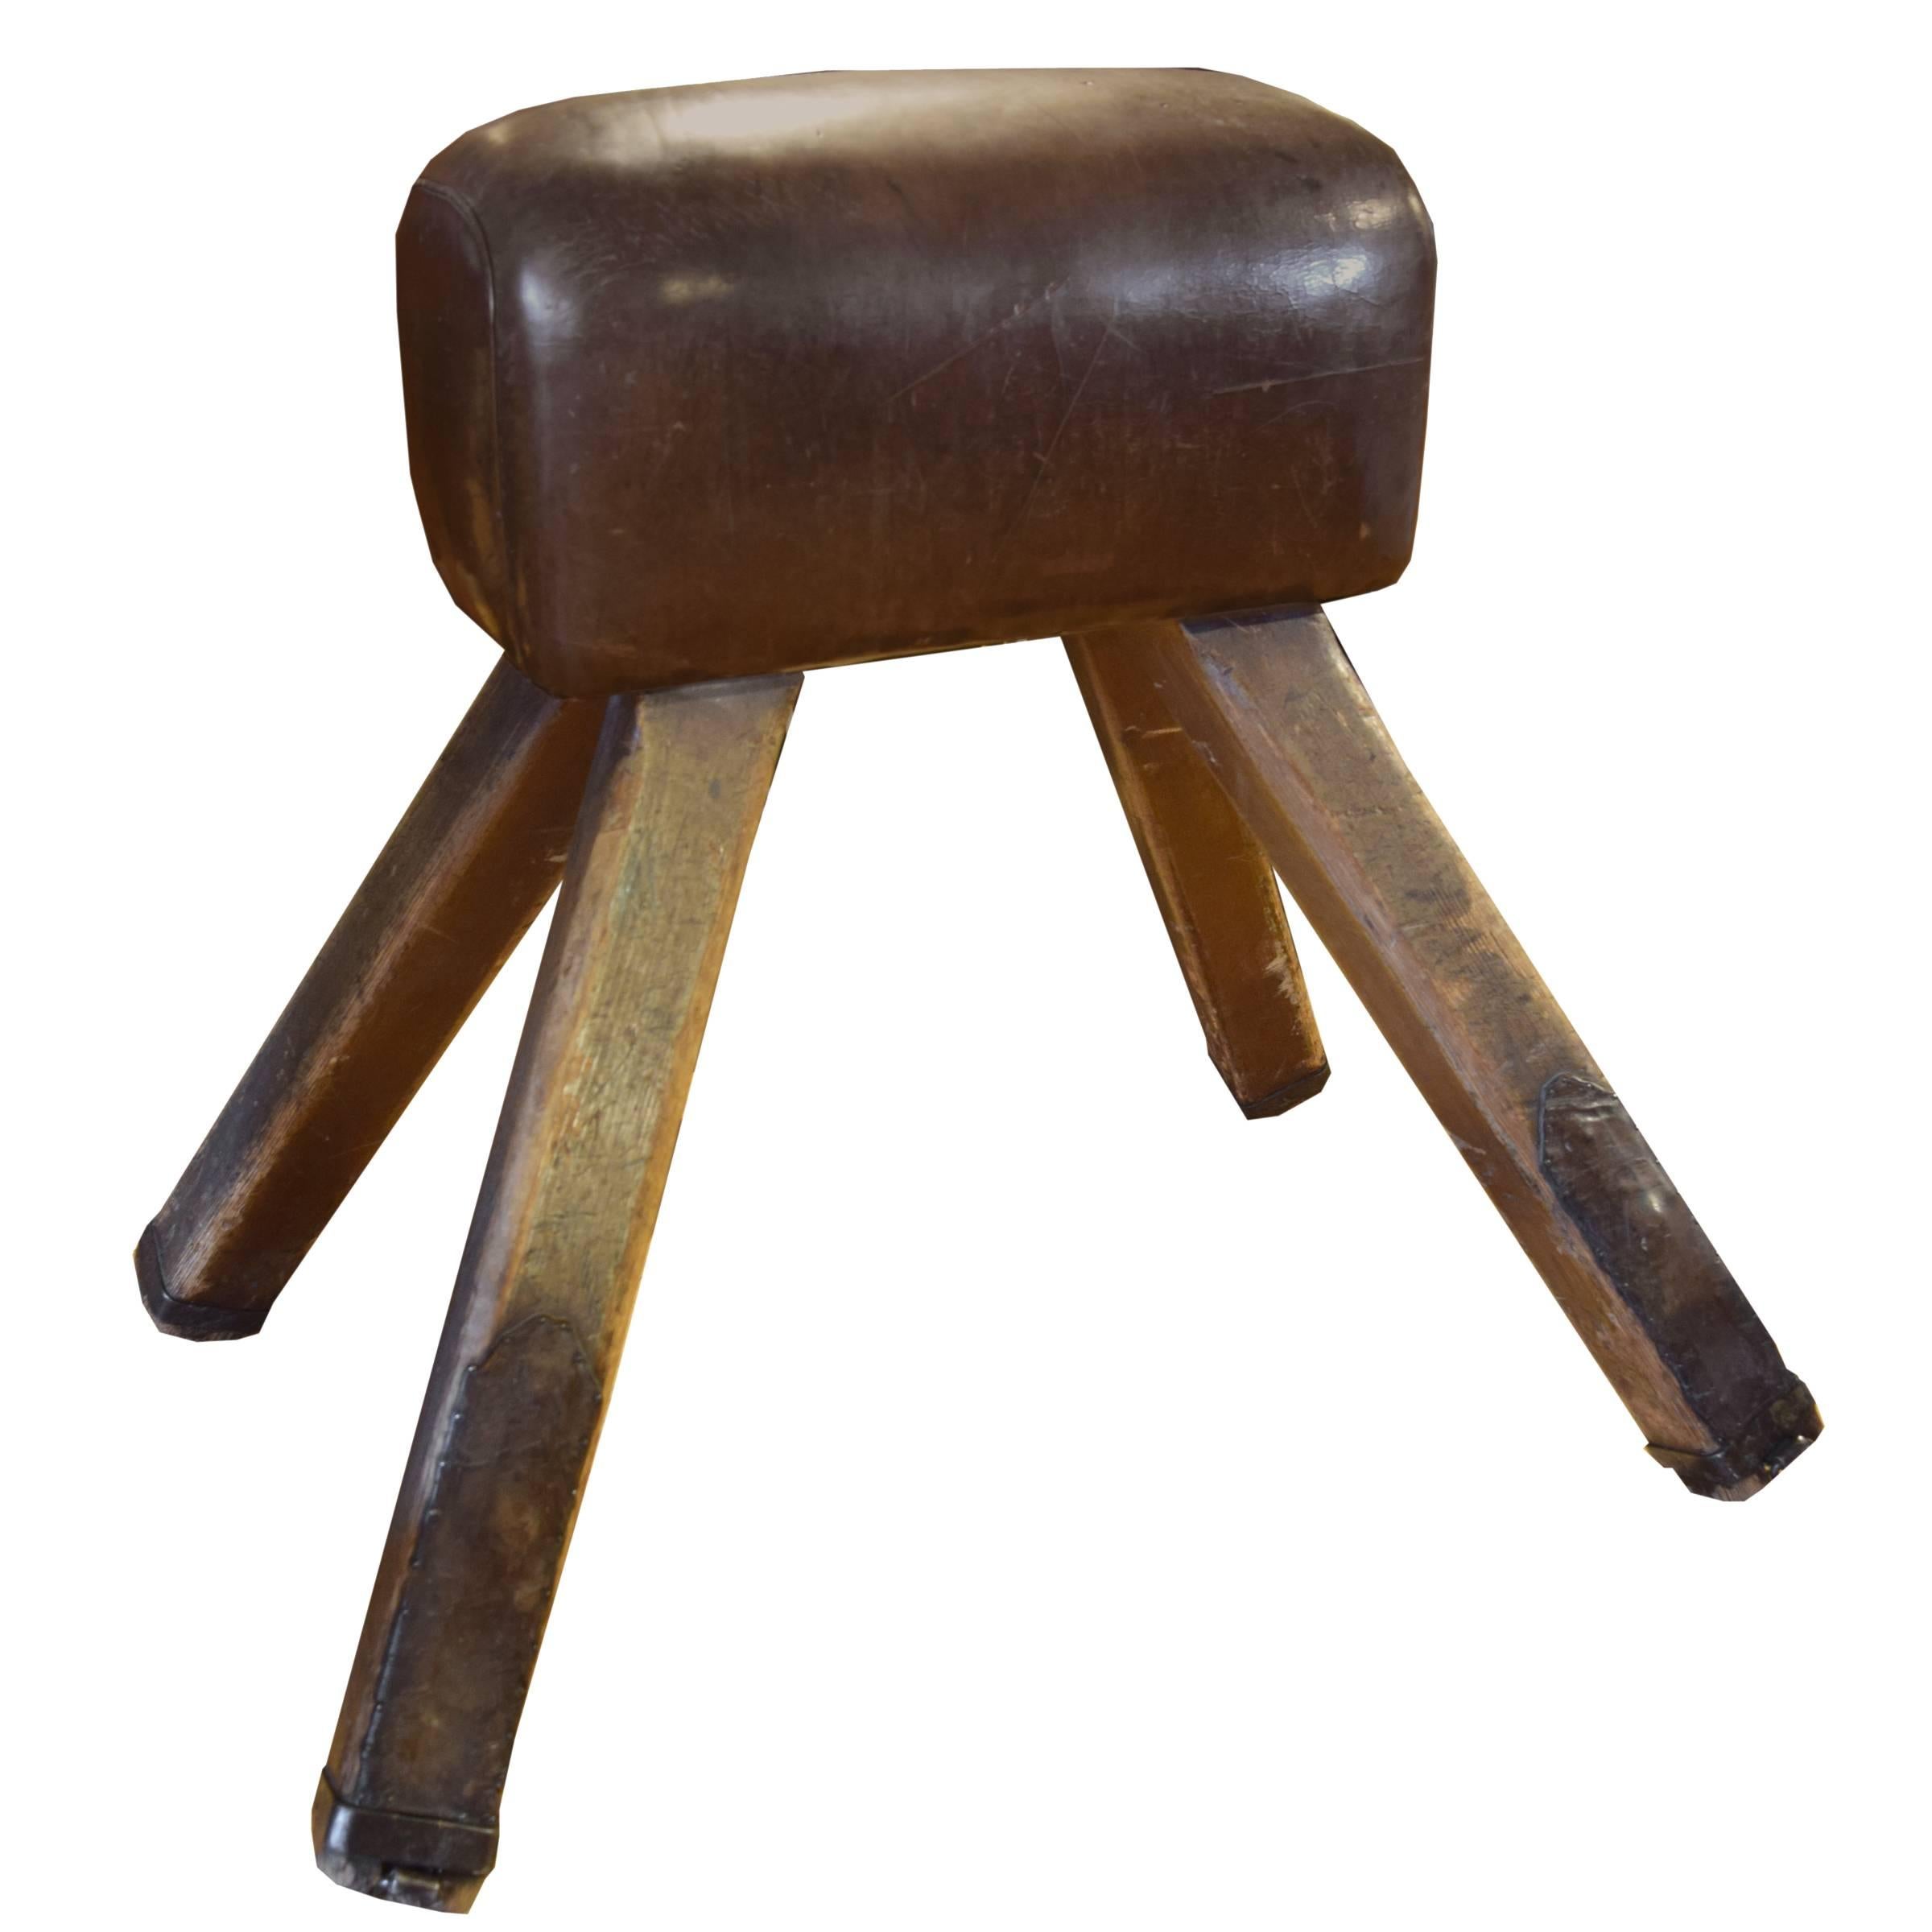 A fantastic early 20th century tall leather pommel horse with leather clad wooden legs, from a gymnasium in the Czech Republic.